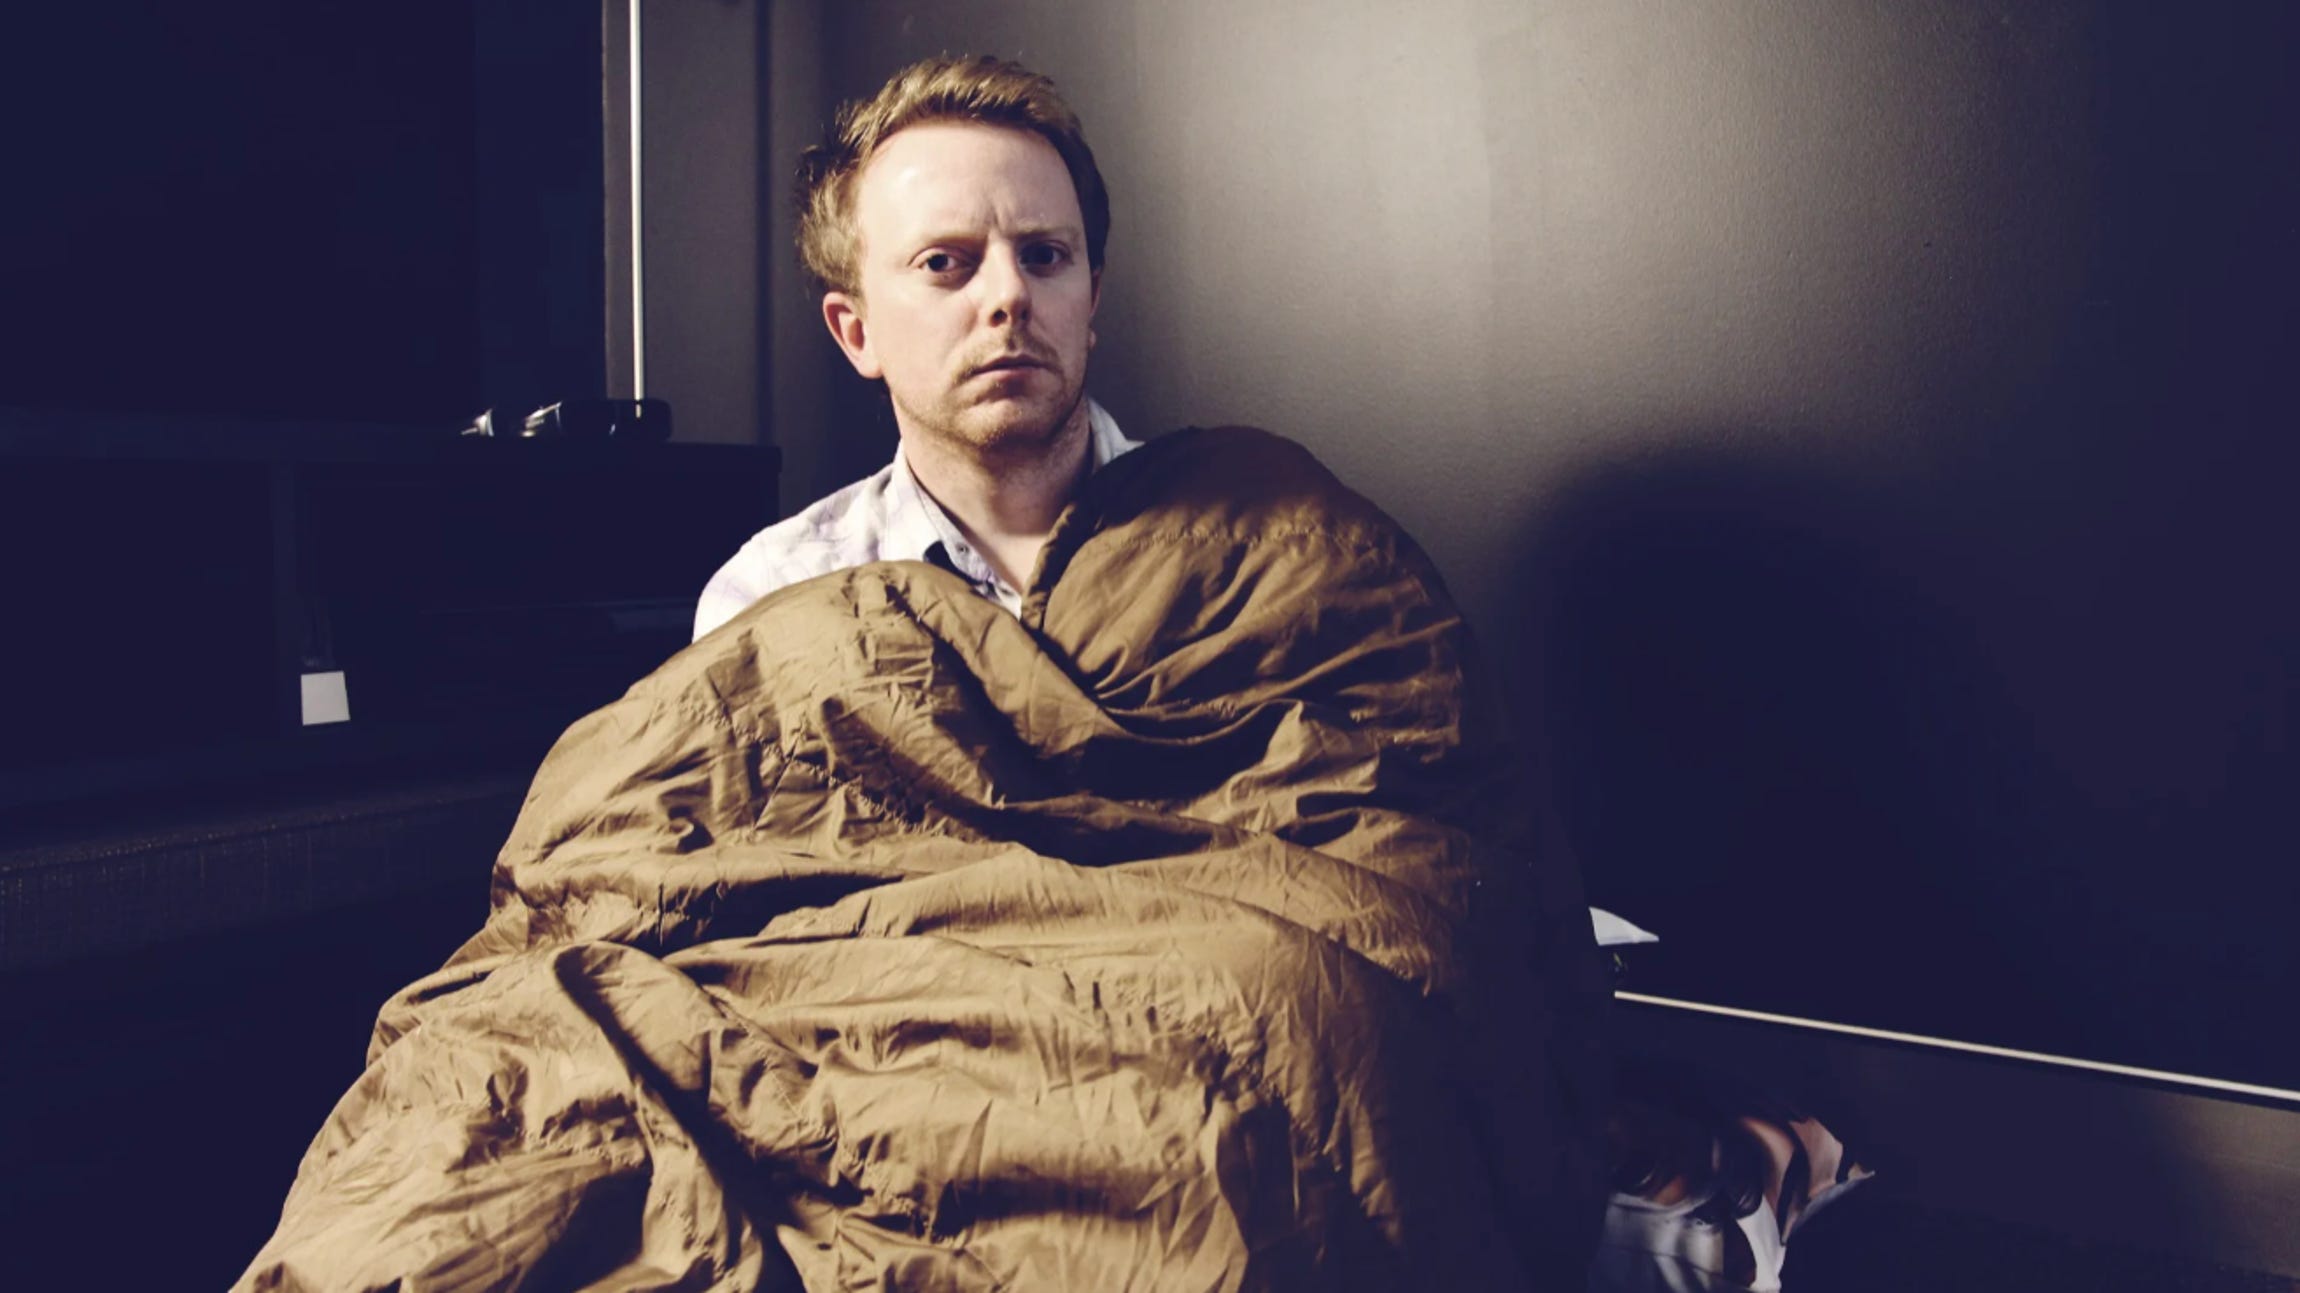 A somewhat dazed- and paranoid-looking Mark Serrels peers at the camera while sitting up out of a sleeping bag, which he clutches to his chest.